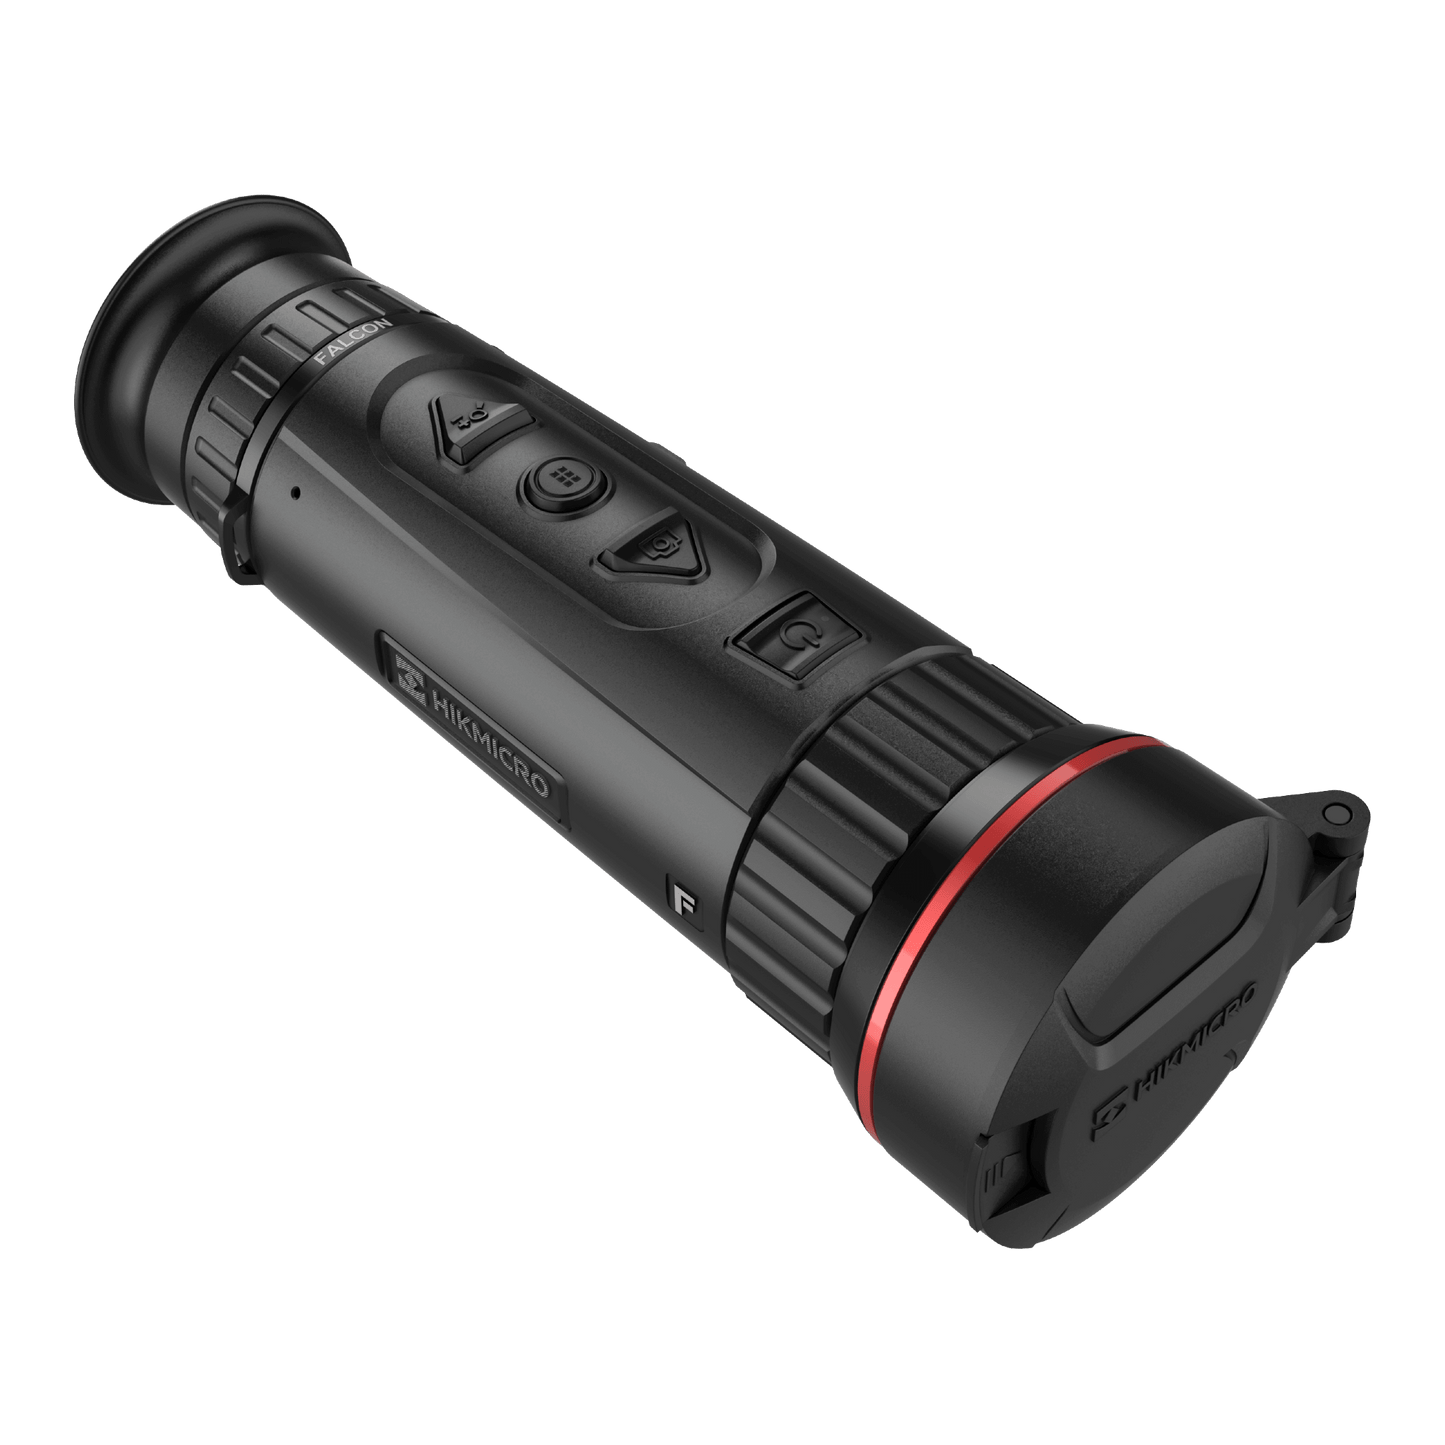 HikMicro Thermal Imaging Monocular for Sale - HikMicro Falcon Series FQ50 - HM-TS46-35XG_W-FQ50 -  Top front right side view